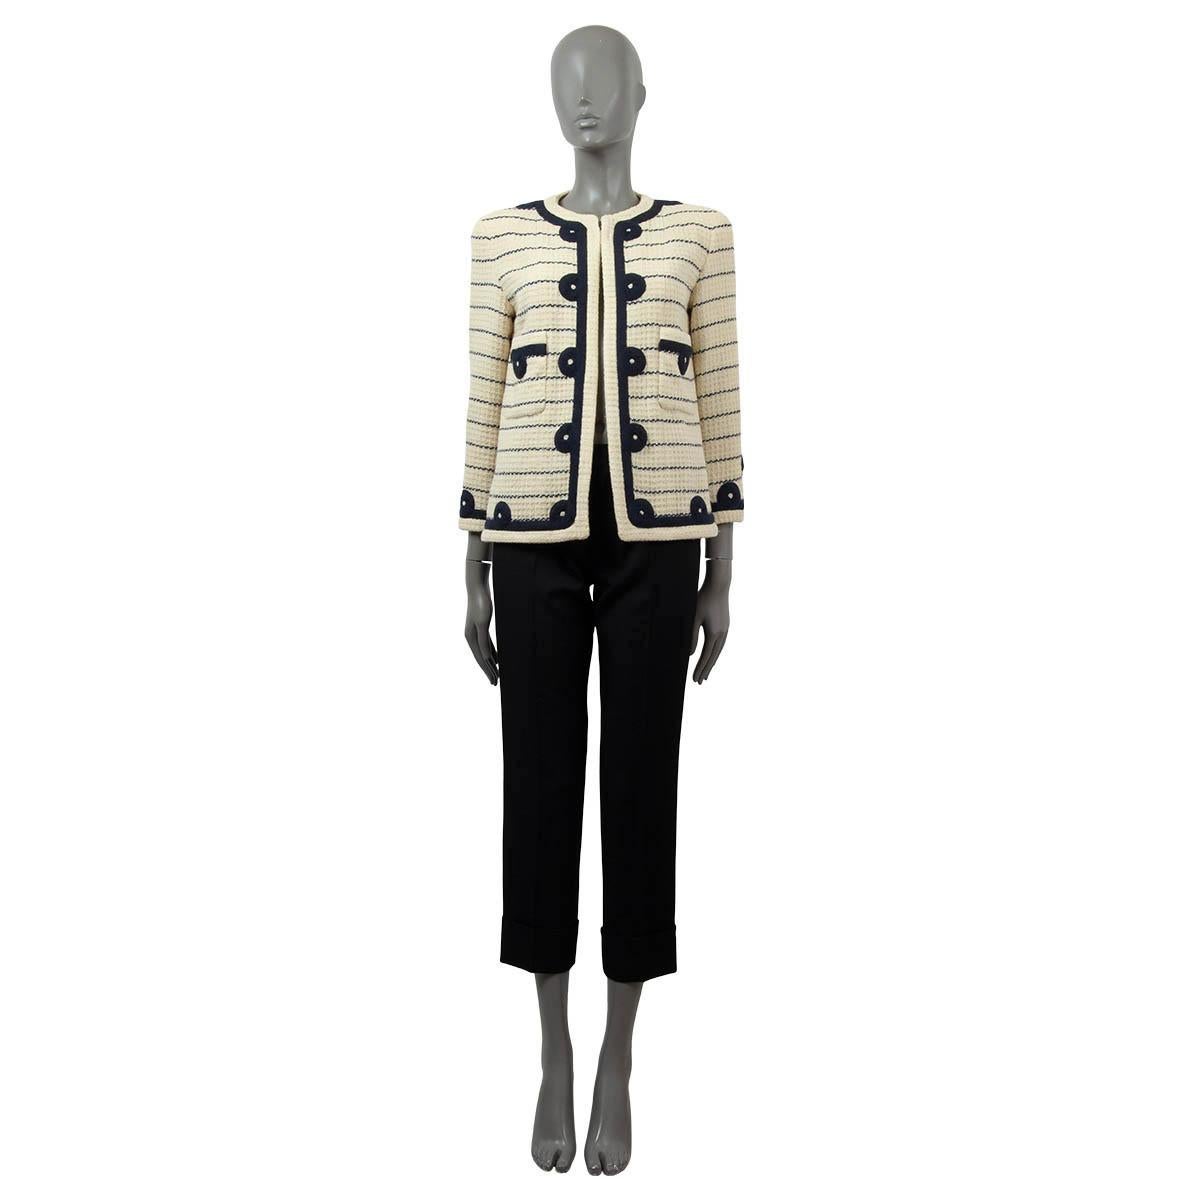 100% authentic Chanel Boutique striped open tweed blazer in ivory and navy blue wool blend (missing tag). The design features softly padded shoulders, two front patch pockets and on hook closure. Lined in ivory silk. Has been worn with some